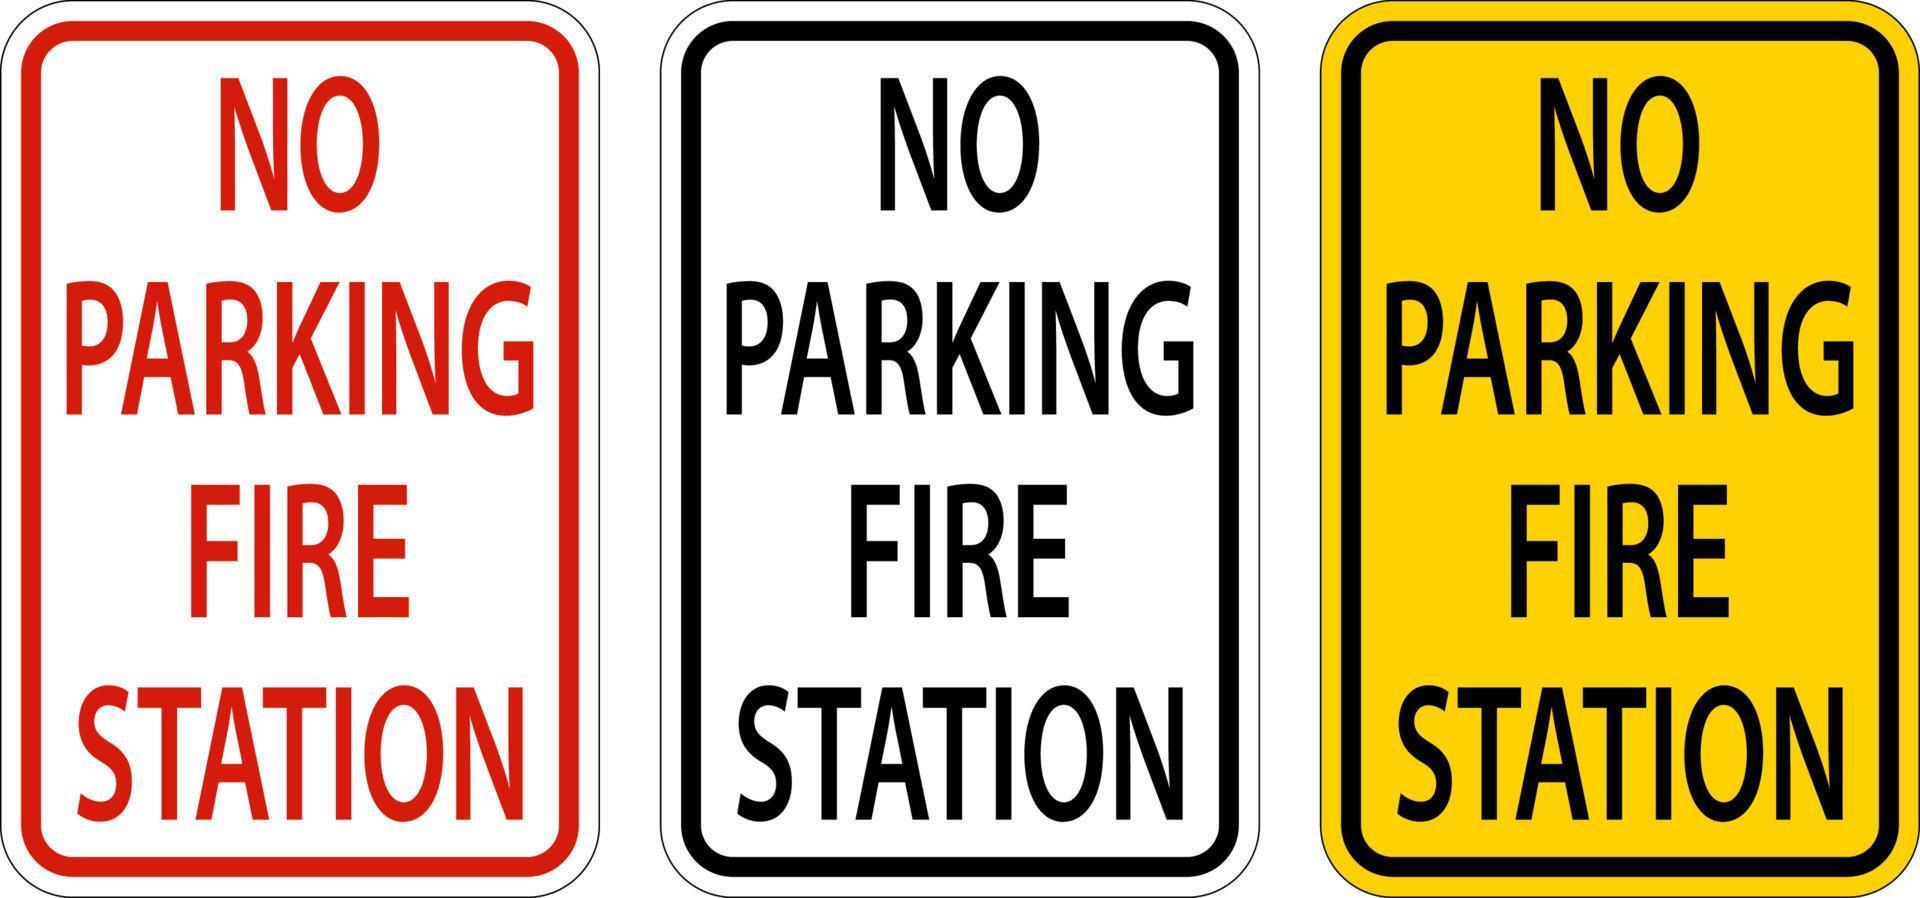 No Parking Fire Station Sign On White Background vector